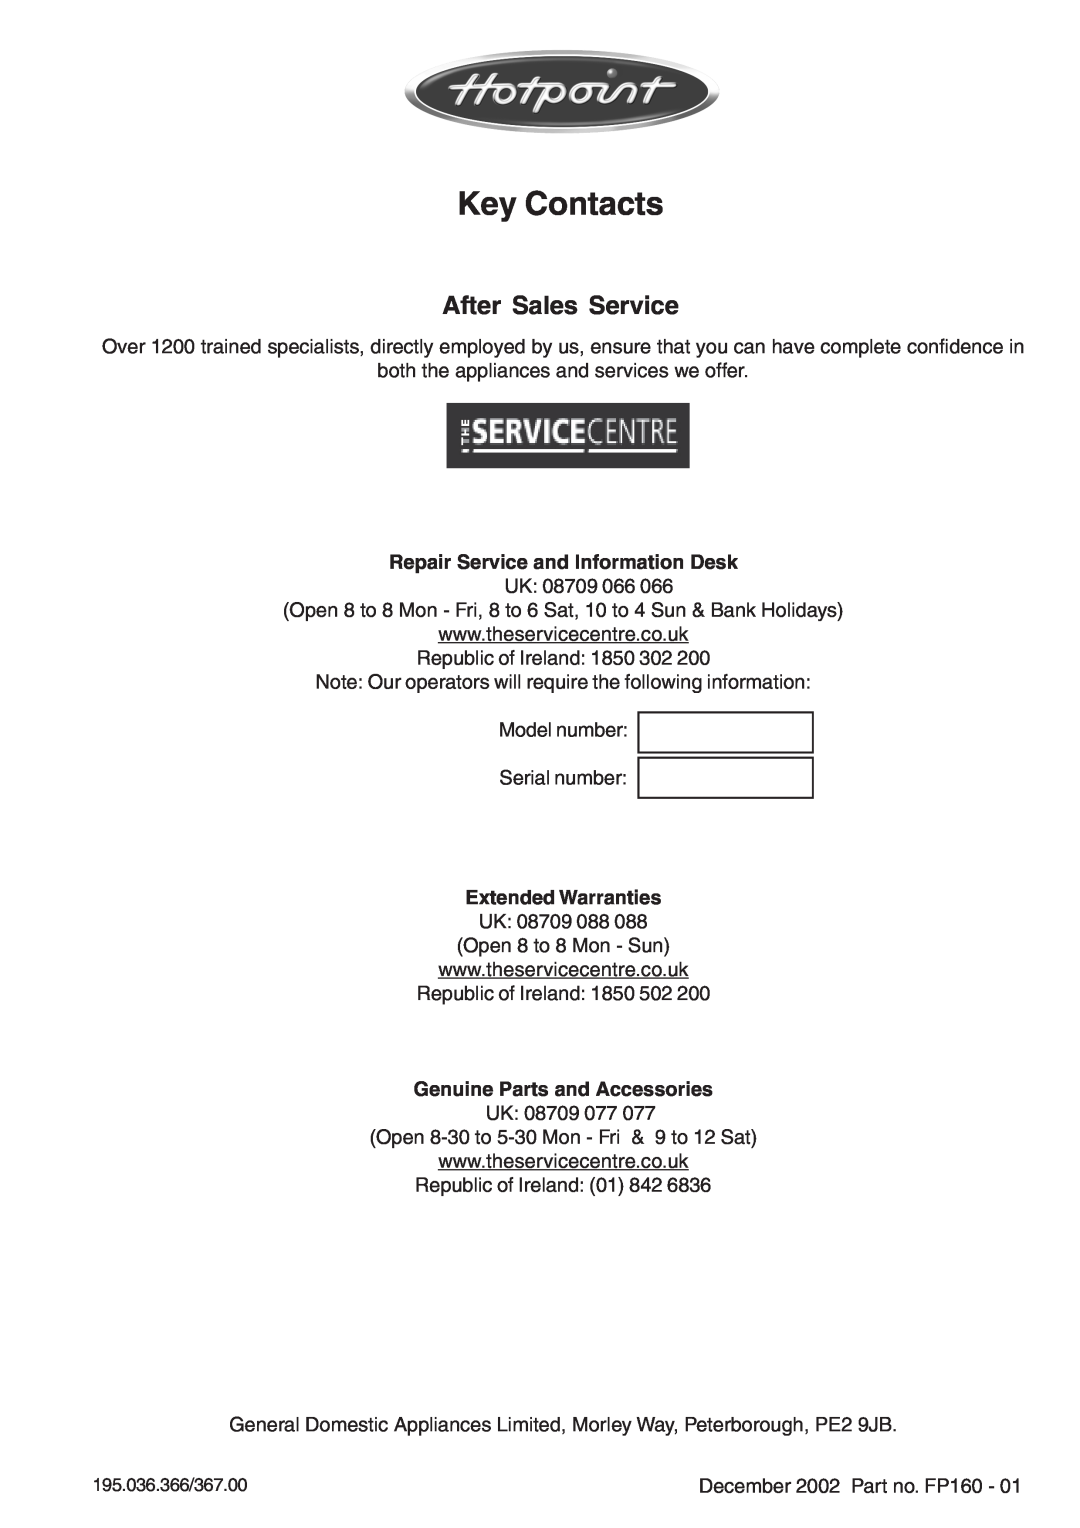 Hotpoint E6002 manual Key Contacts, After Sales Service, Repair Service and Information Desk, Extended Warranties 